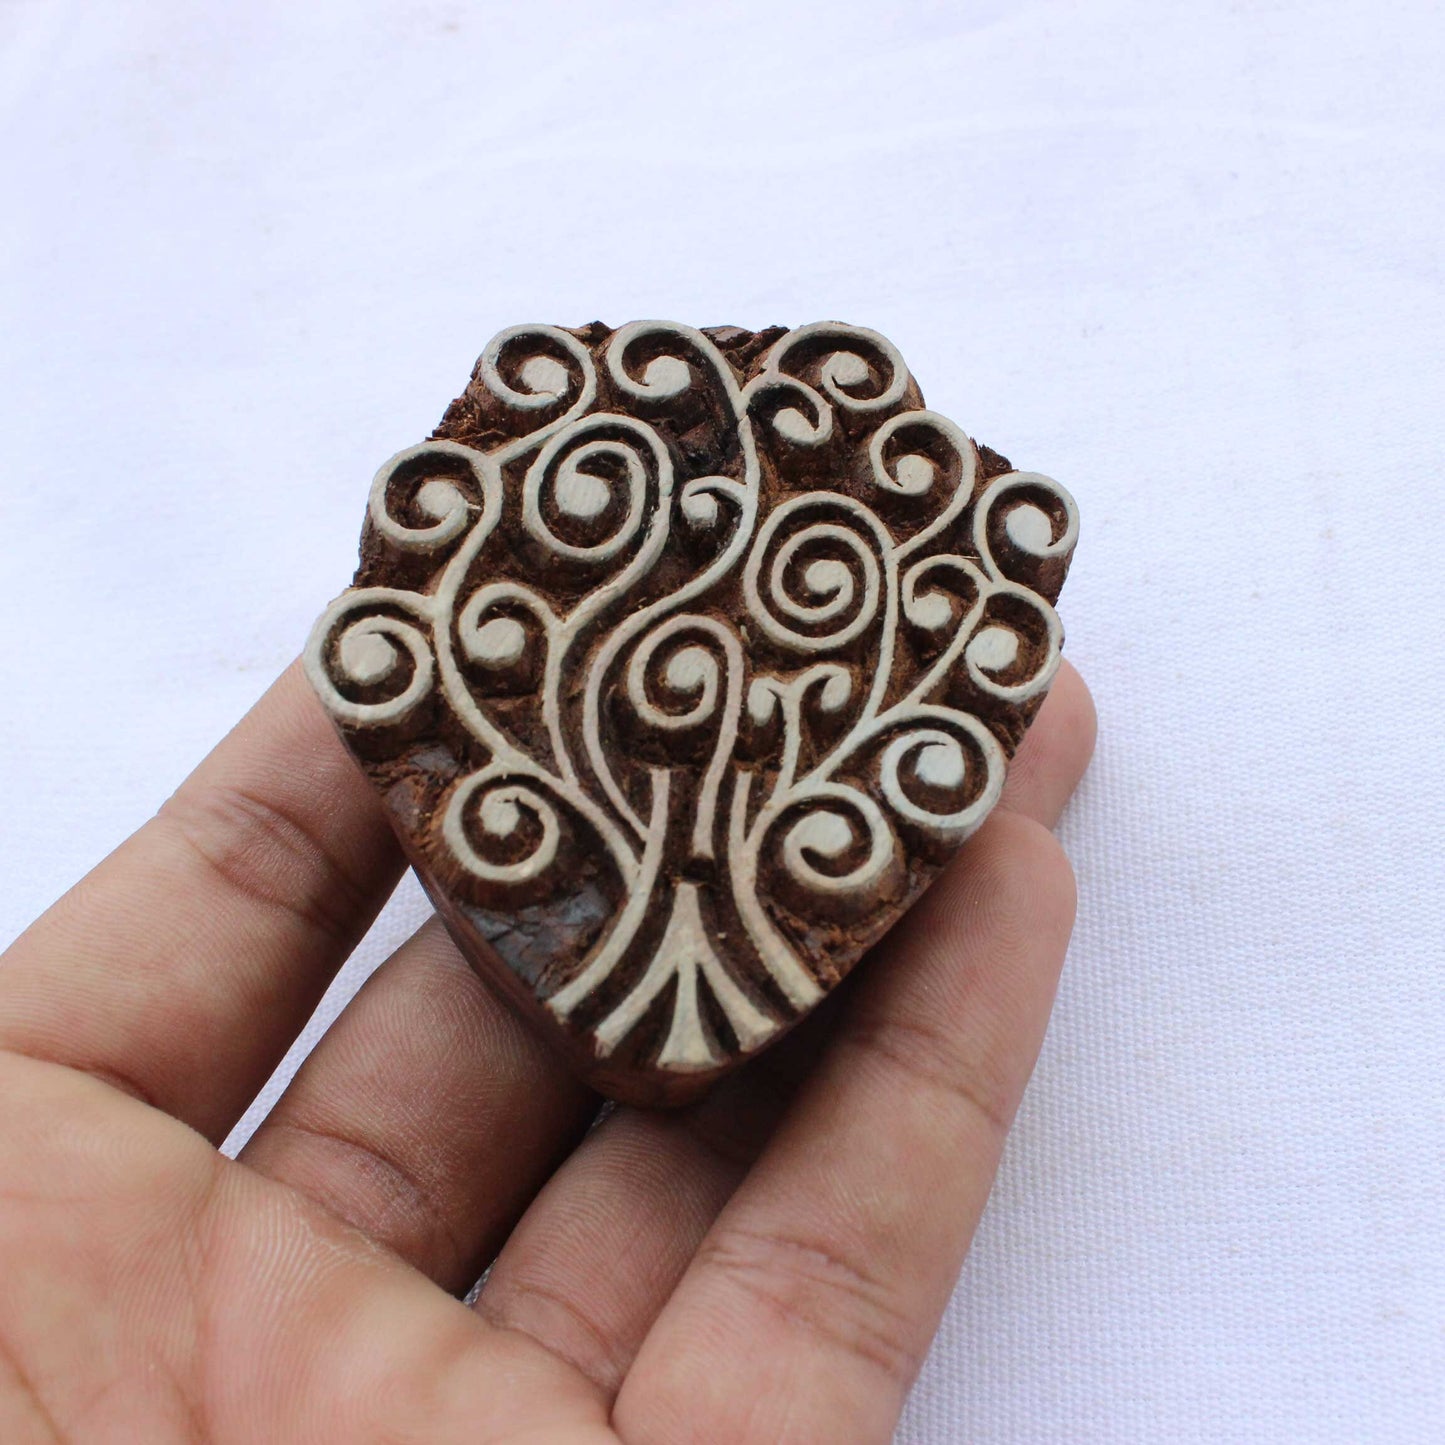 Tree Wood Block Stamp Celtic Fabric Stamp Hand Carved Stamp Indian Textile Printing Block For Printing Tree Of Life Soap Stamp Bohemian